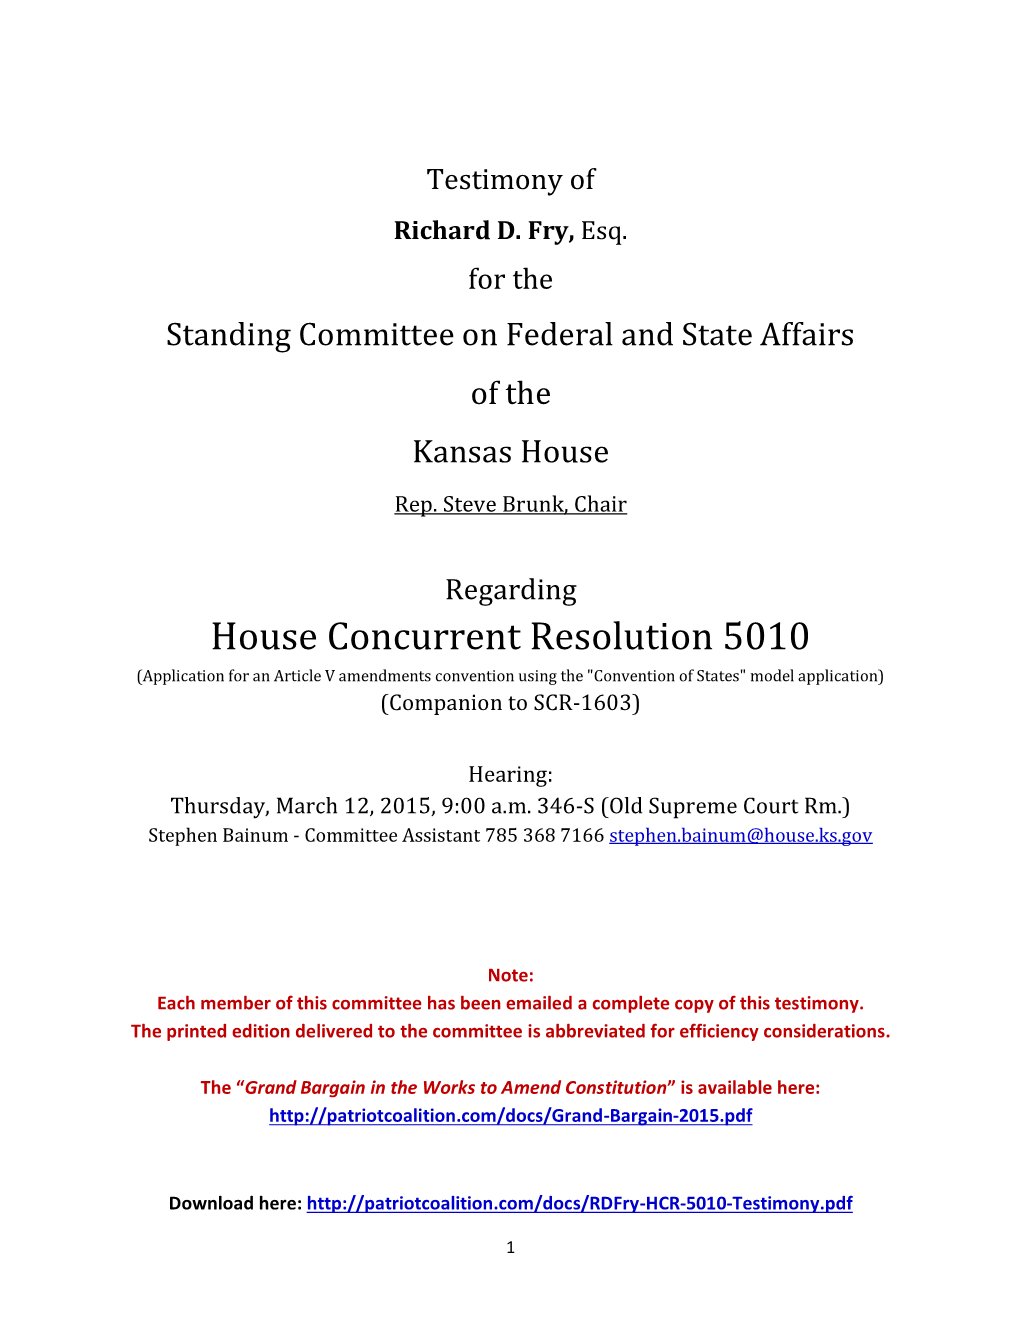 House Concurrent Resolution 5010 (Application for an Article V Amendments Convention Using the "Convention of States" Model Application) (Companion to SCR-1603)